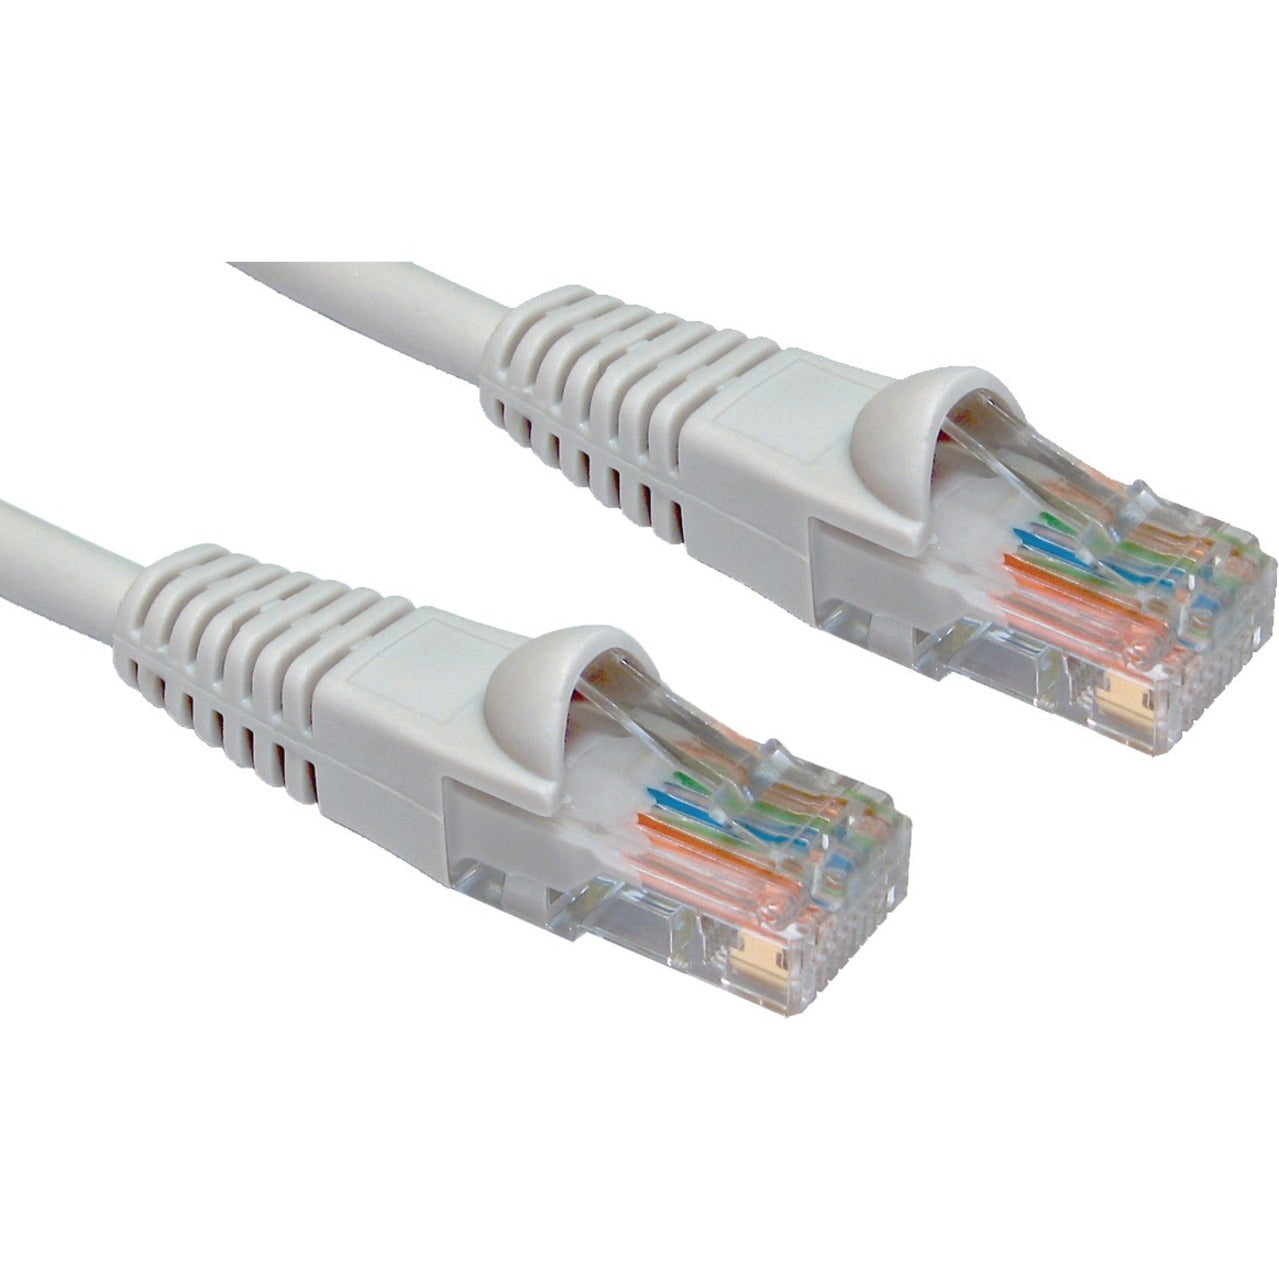 W Box C5EGY25 0E-C5EGY25 Cat.5e Patch Network Cable, 25 ft, Gold Plated Connectors, Gray